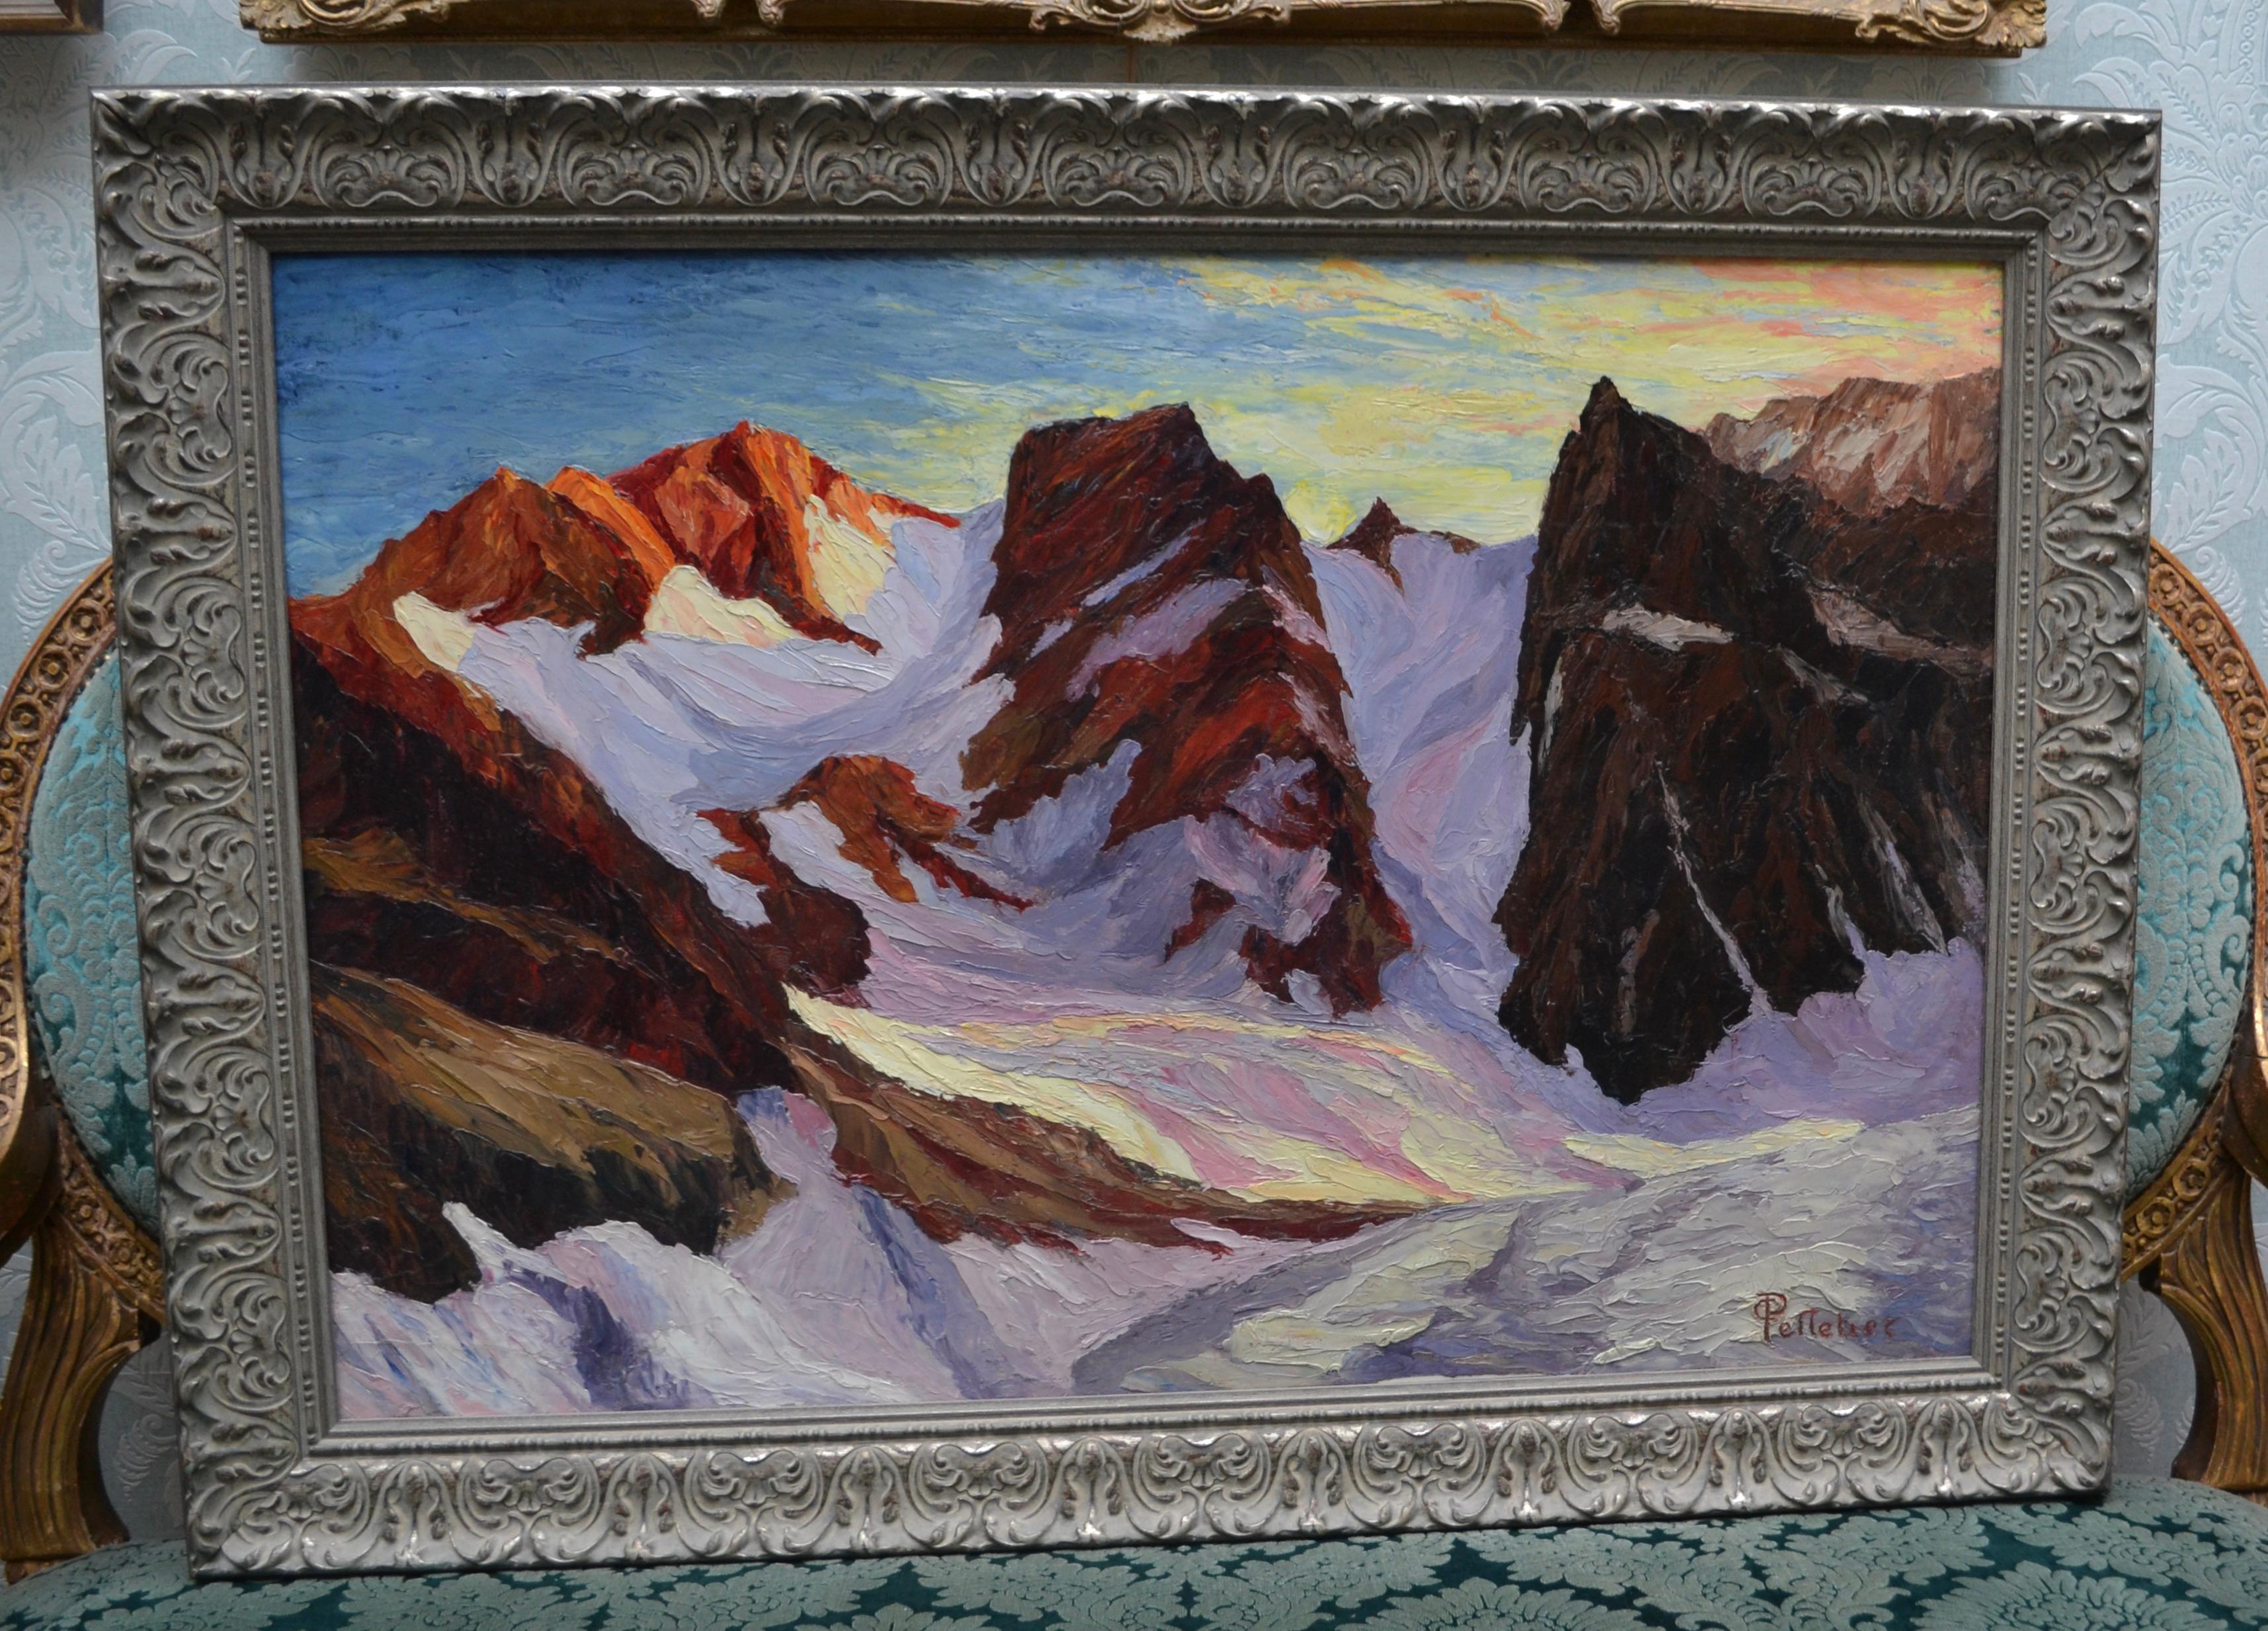 This painting of a European alpine Mountain scene with very bold and distinctive brushwork is done in an oil medium piece on paper, which has been affixed to a multi-fibre paperboard. Signed Pelletier on the lower right corner with verso label on